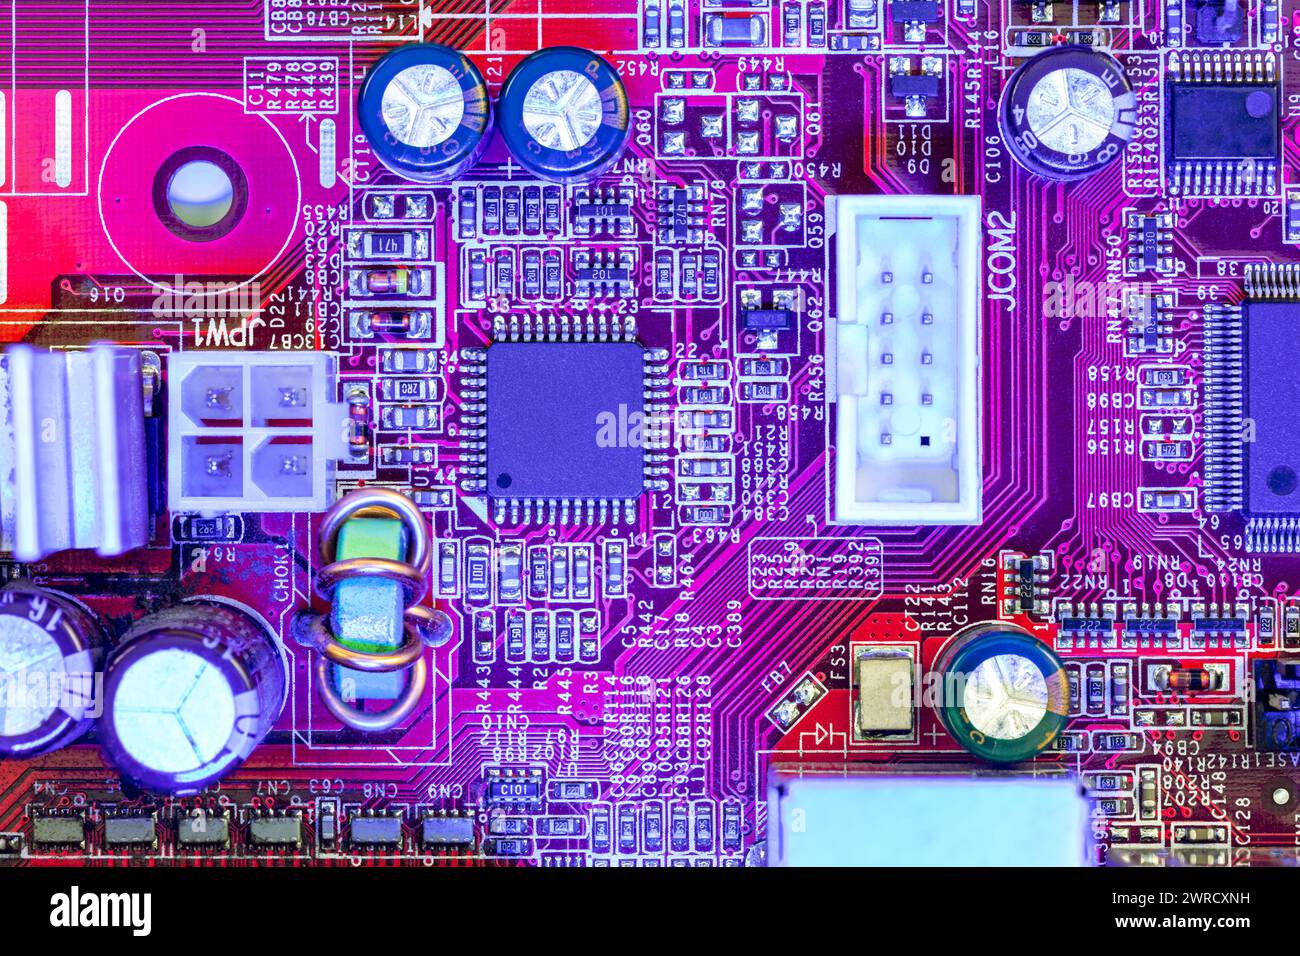 computer main board with sockets and chips. high-detailed view in blue red color. Stock Photo